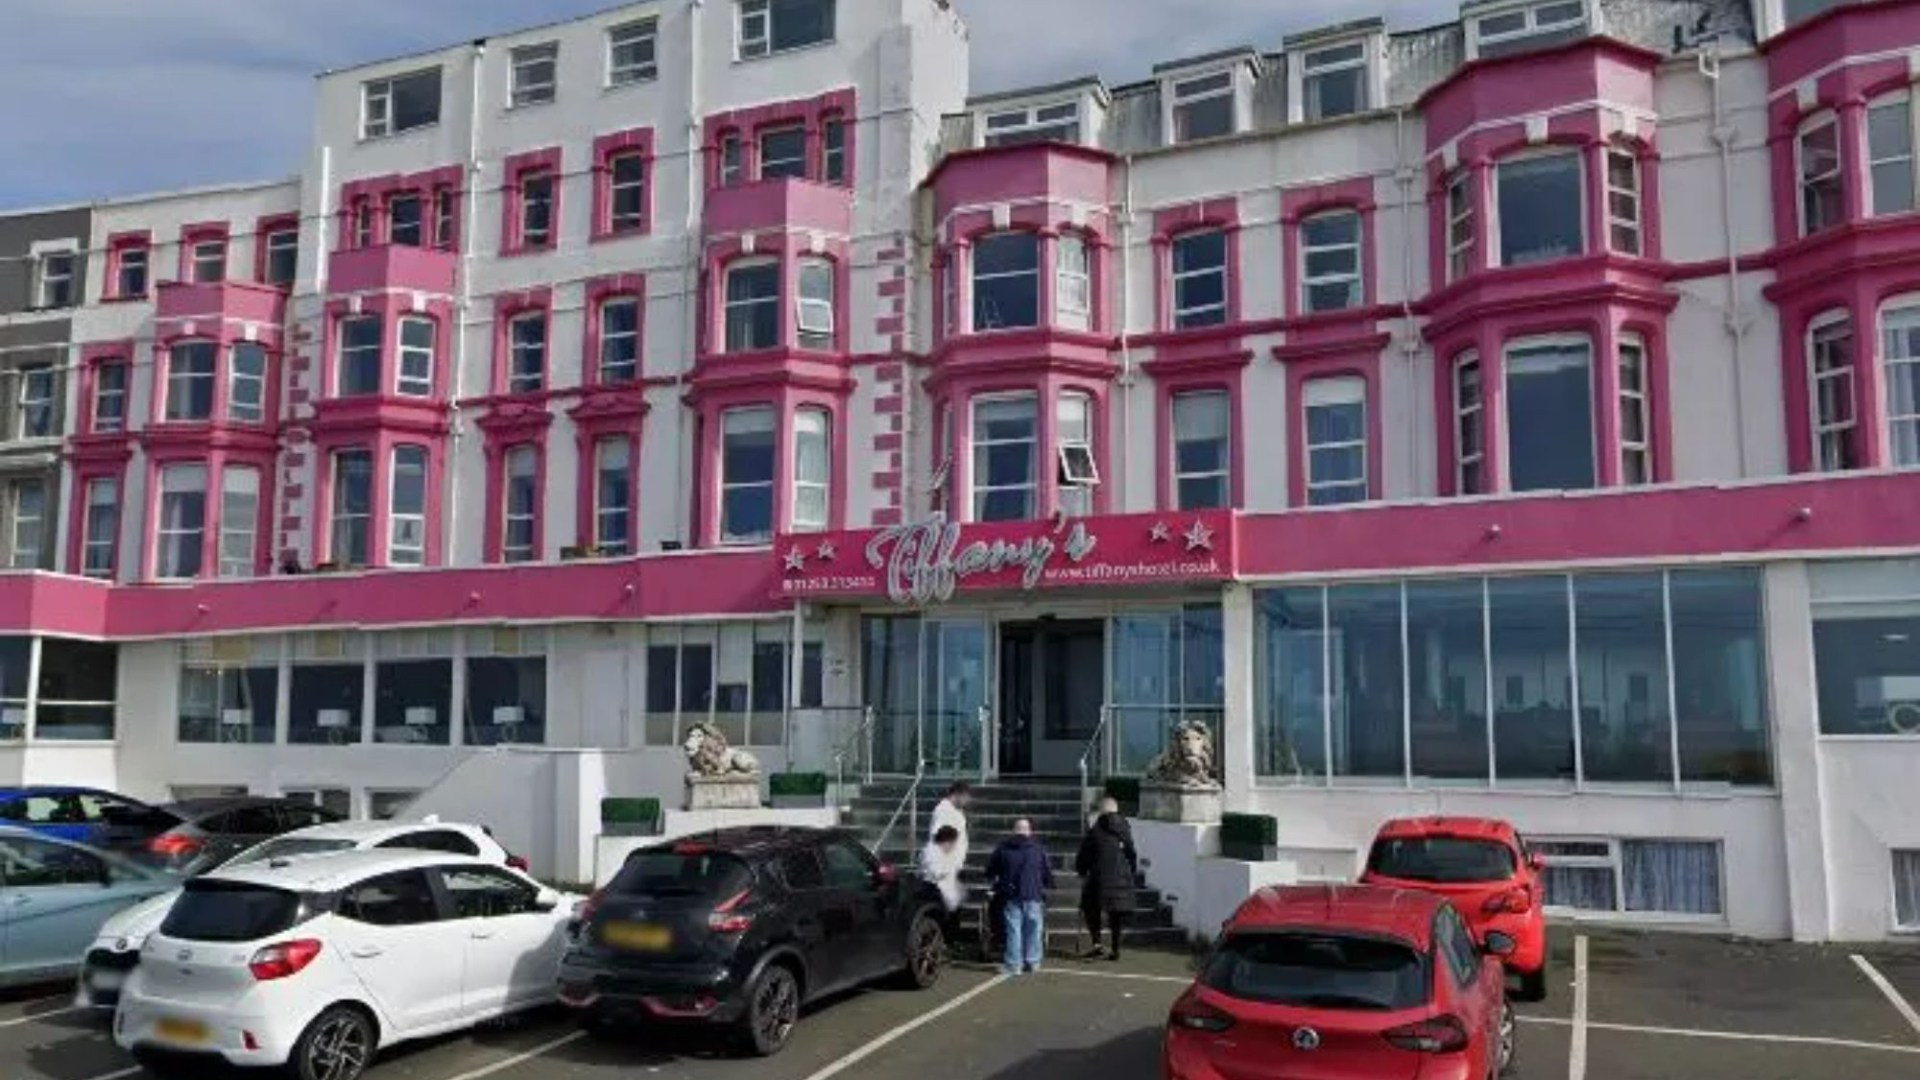 Horror as boy, 10, is left fighting for life after suffering ‘high voltage’ electric shock in Blackpool hotel